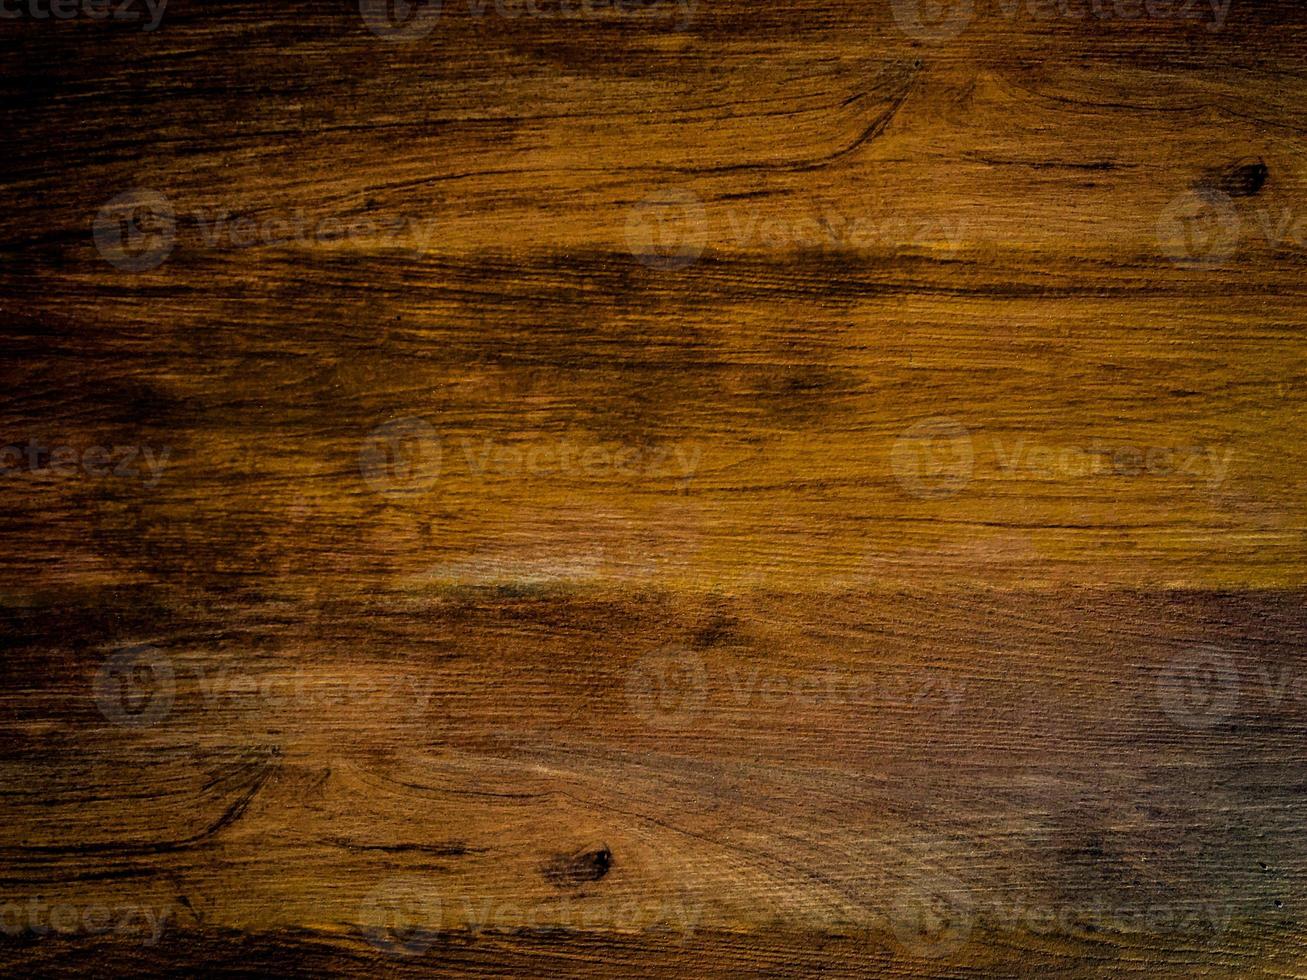 Dark wood texture use as natural background with copy space for artwork. Top view photo